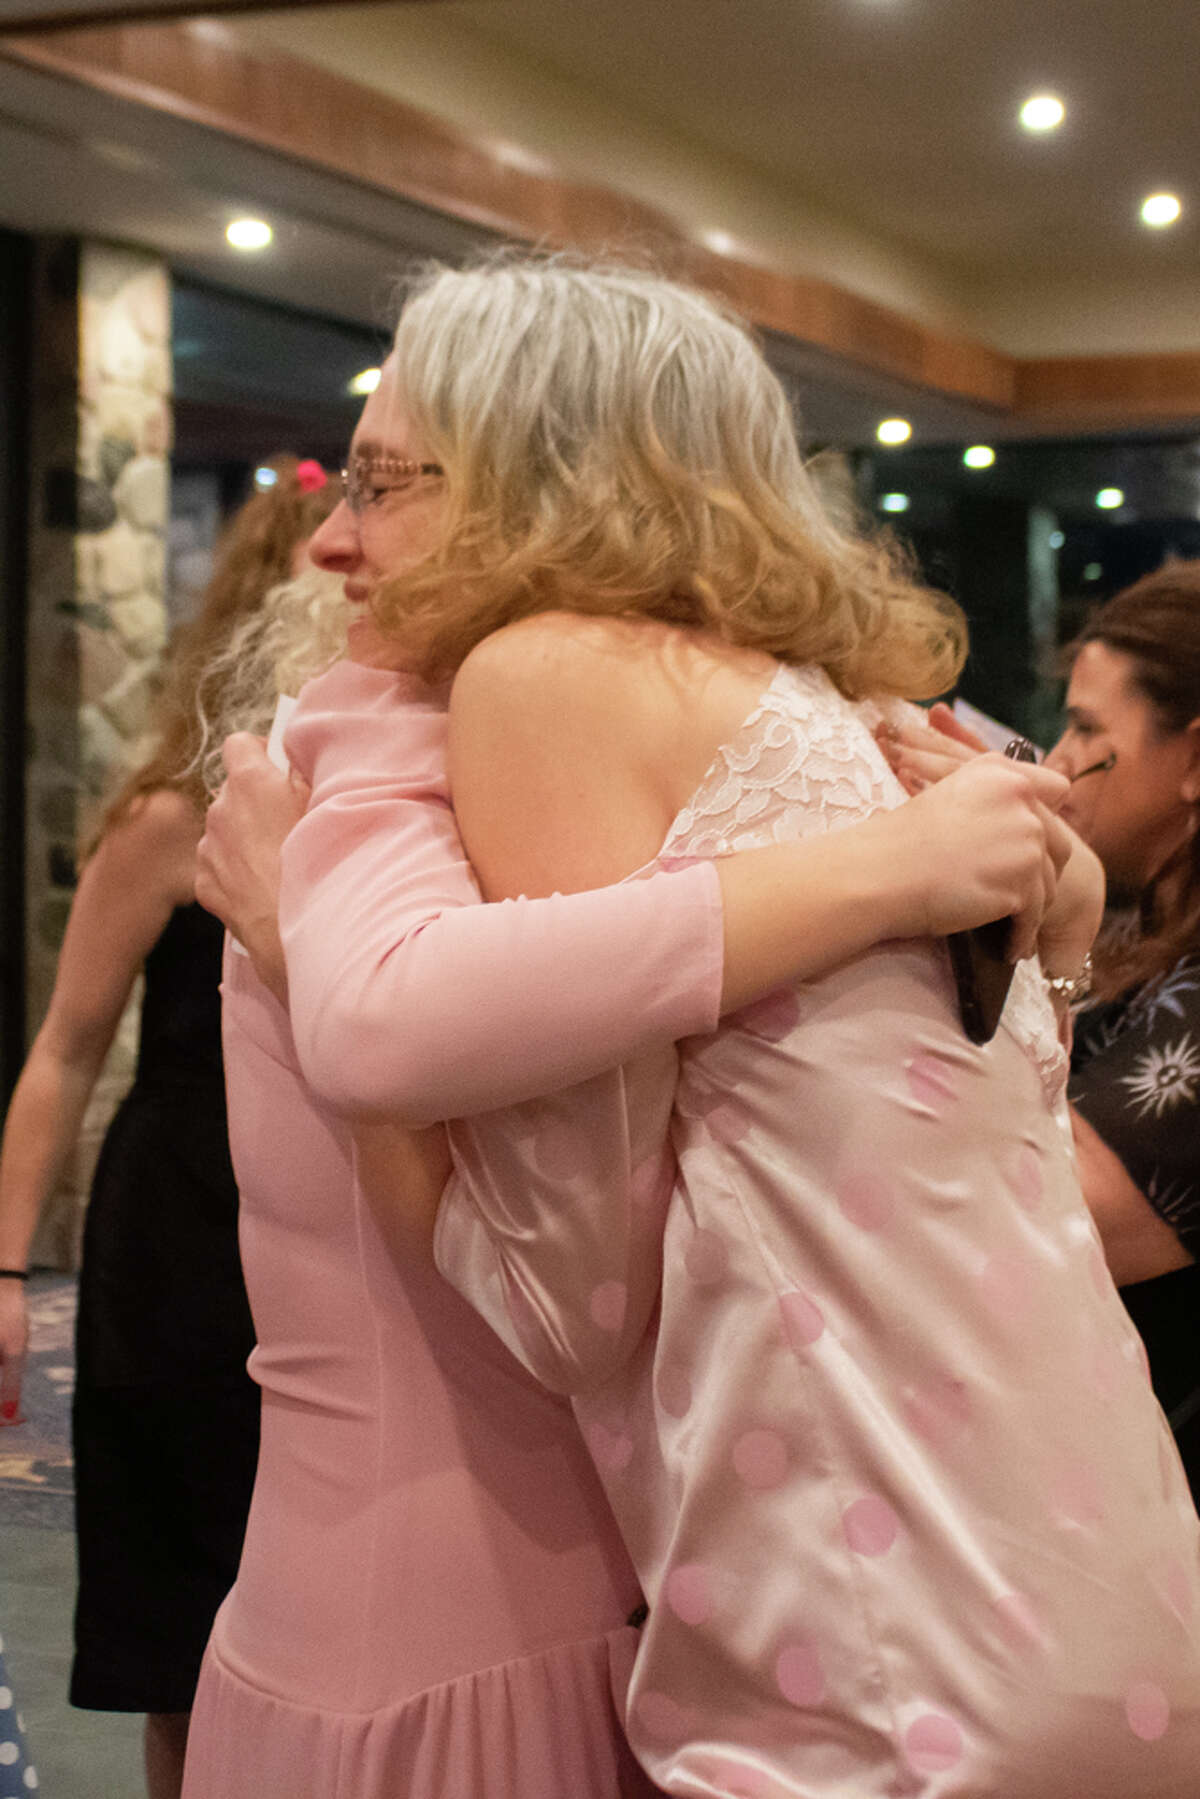 Kara Vanderwater, left, hugs her friend Jenny Seidel, right, during the Great Lakes Bay Mom Prom on Saturday, Feb. 26, 2022 at the Great Hall Banquet and Convention Center.